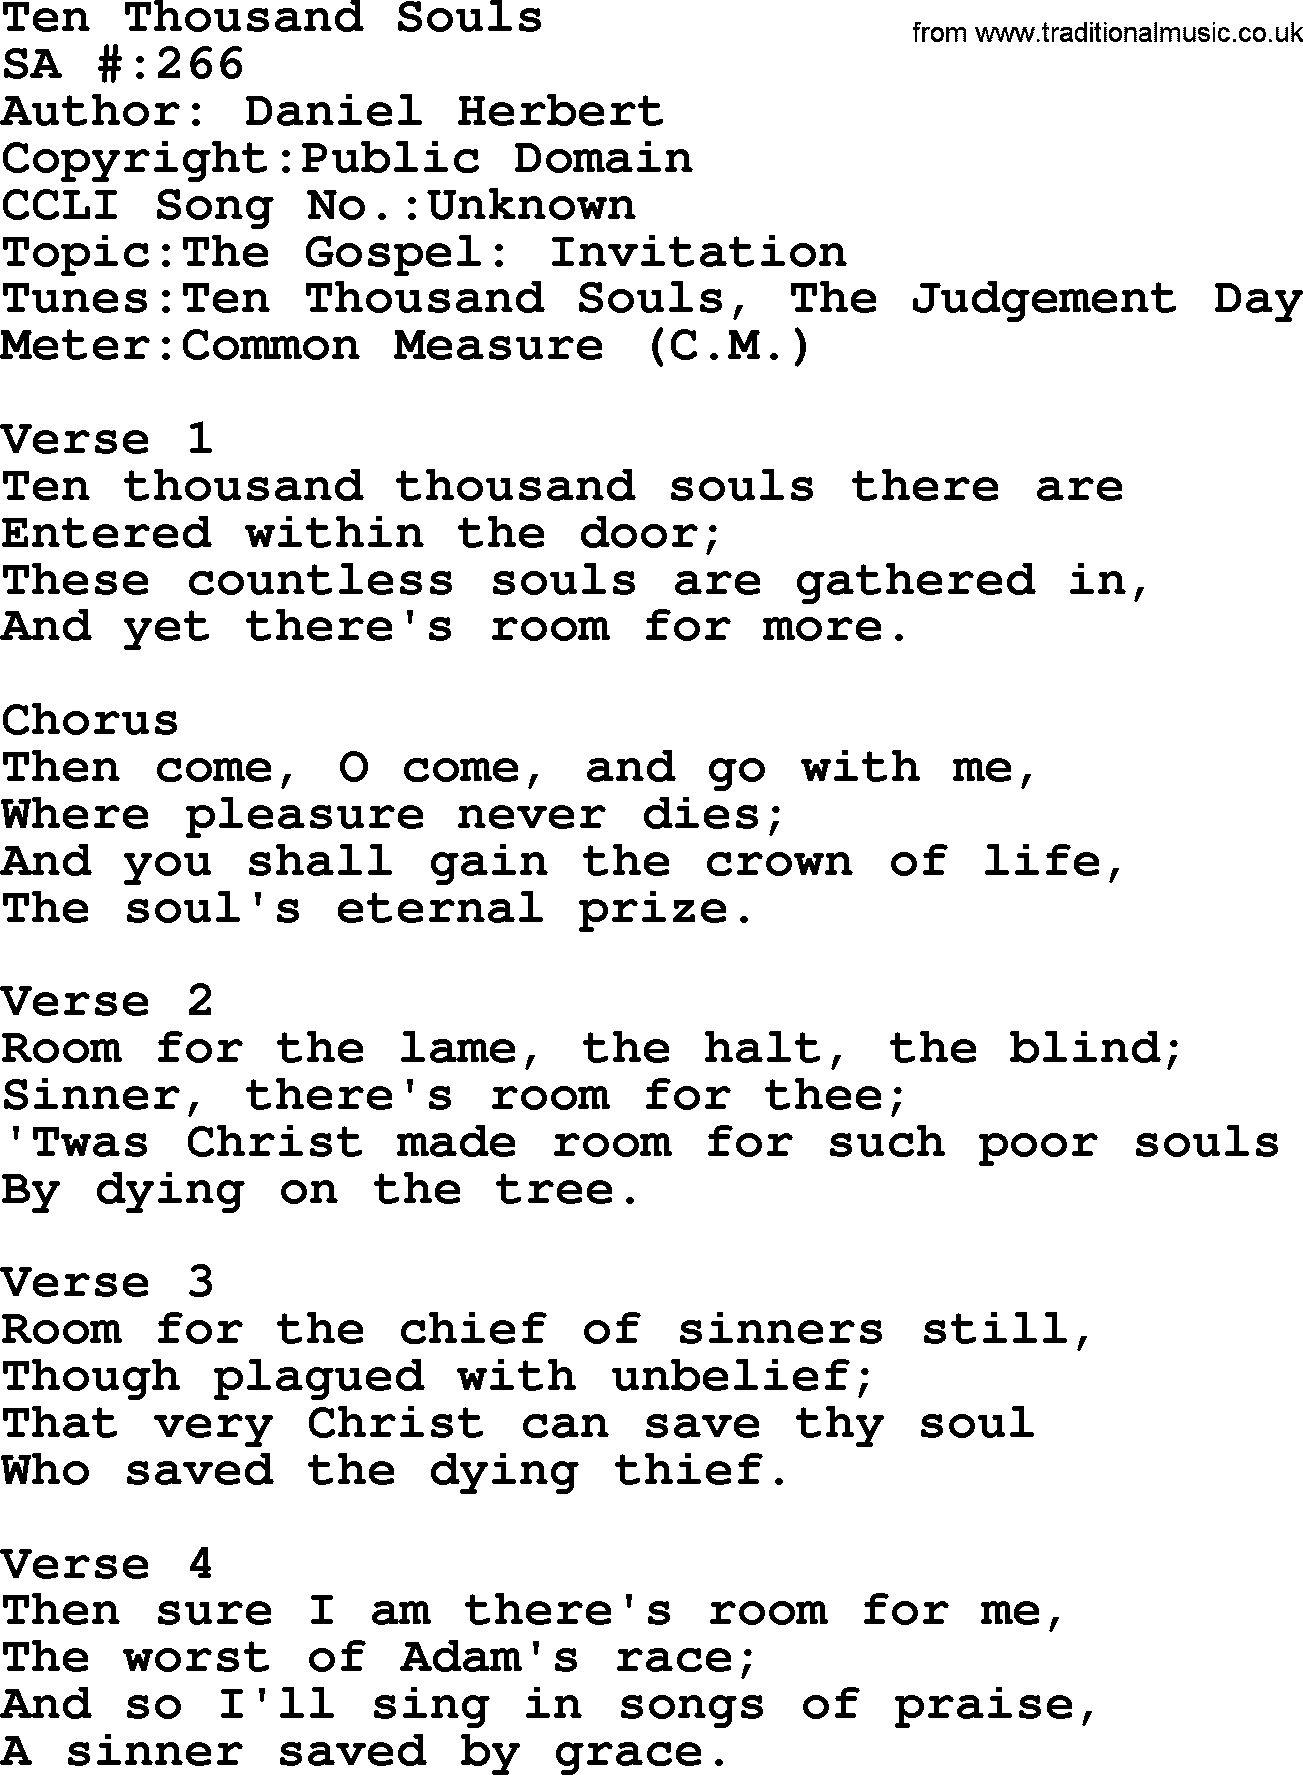 Salvation Army Hymnal, title: Ten Thousand Souls, with lyrics and PDF,